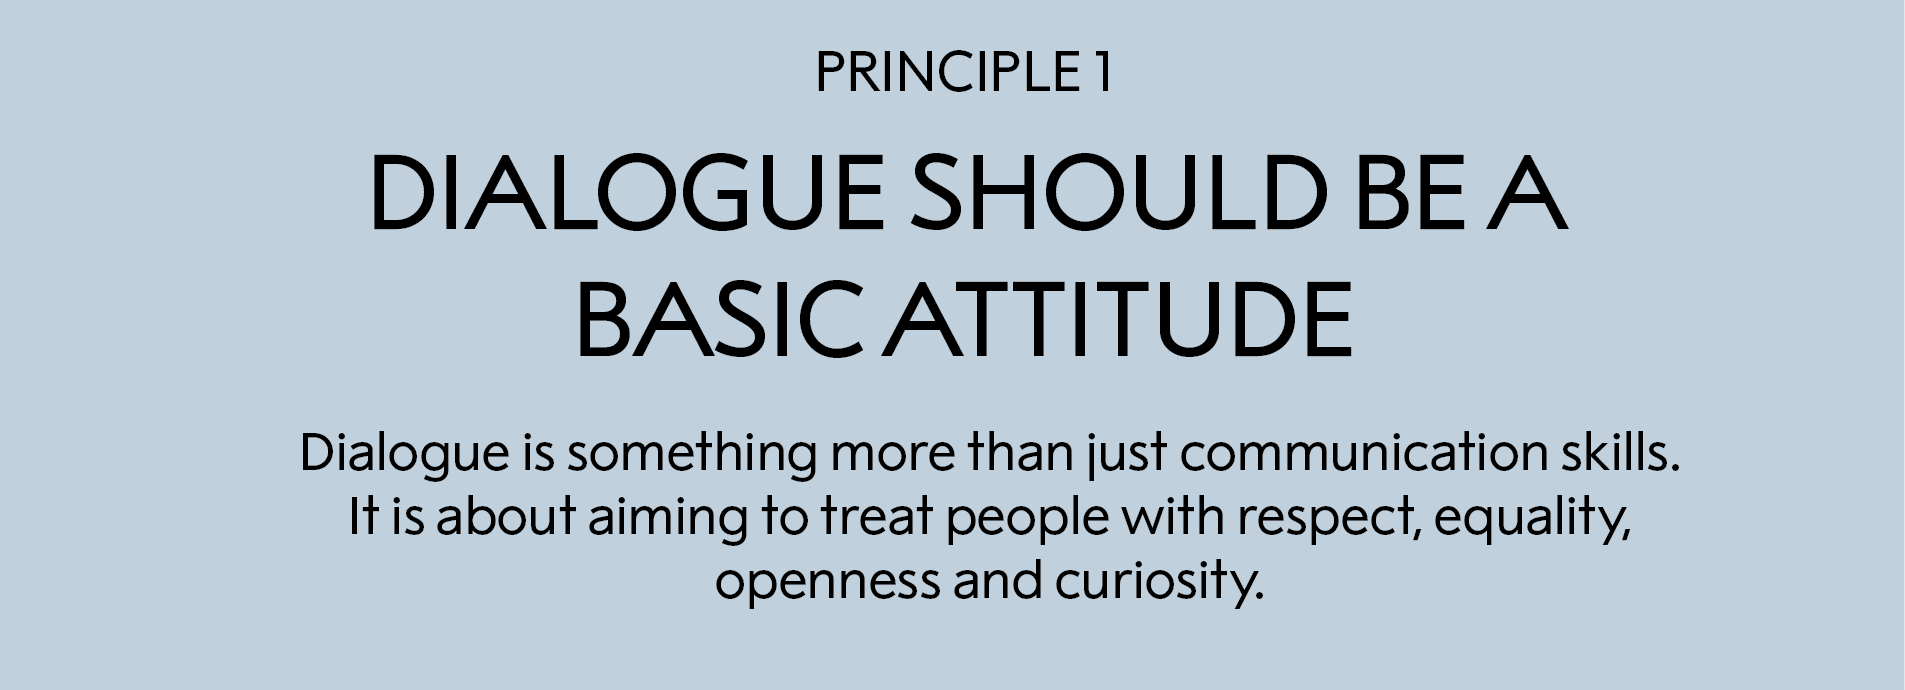 principle 1:  Dialogue should be a basic attitude:   Dialogue is something more than just communication skills. It is about aiming to treat people with respect, equality, openness and curiosity. 